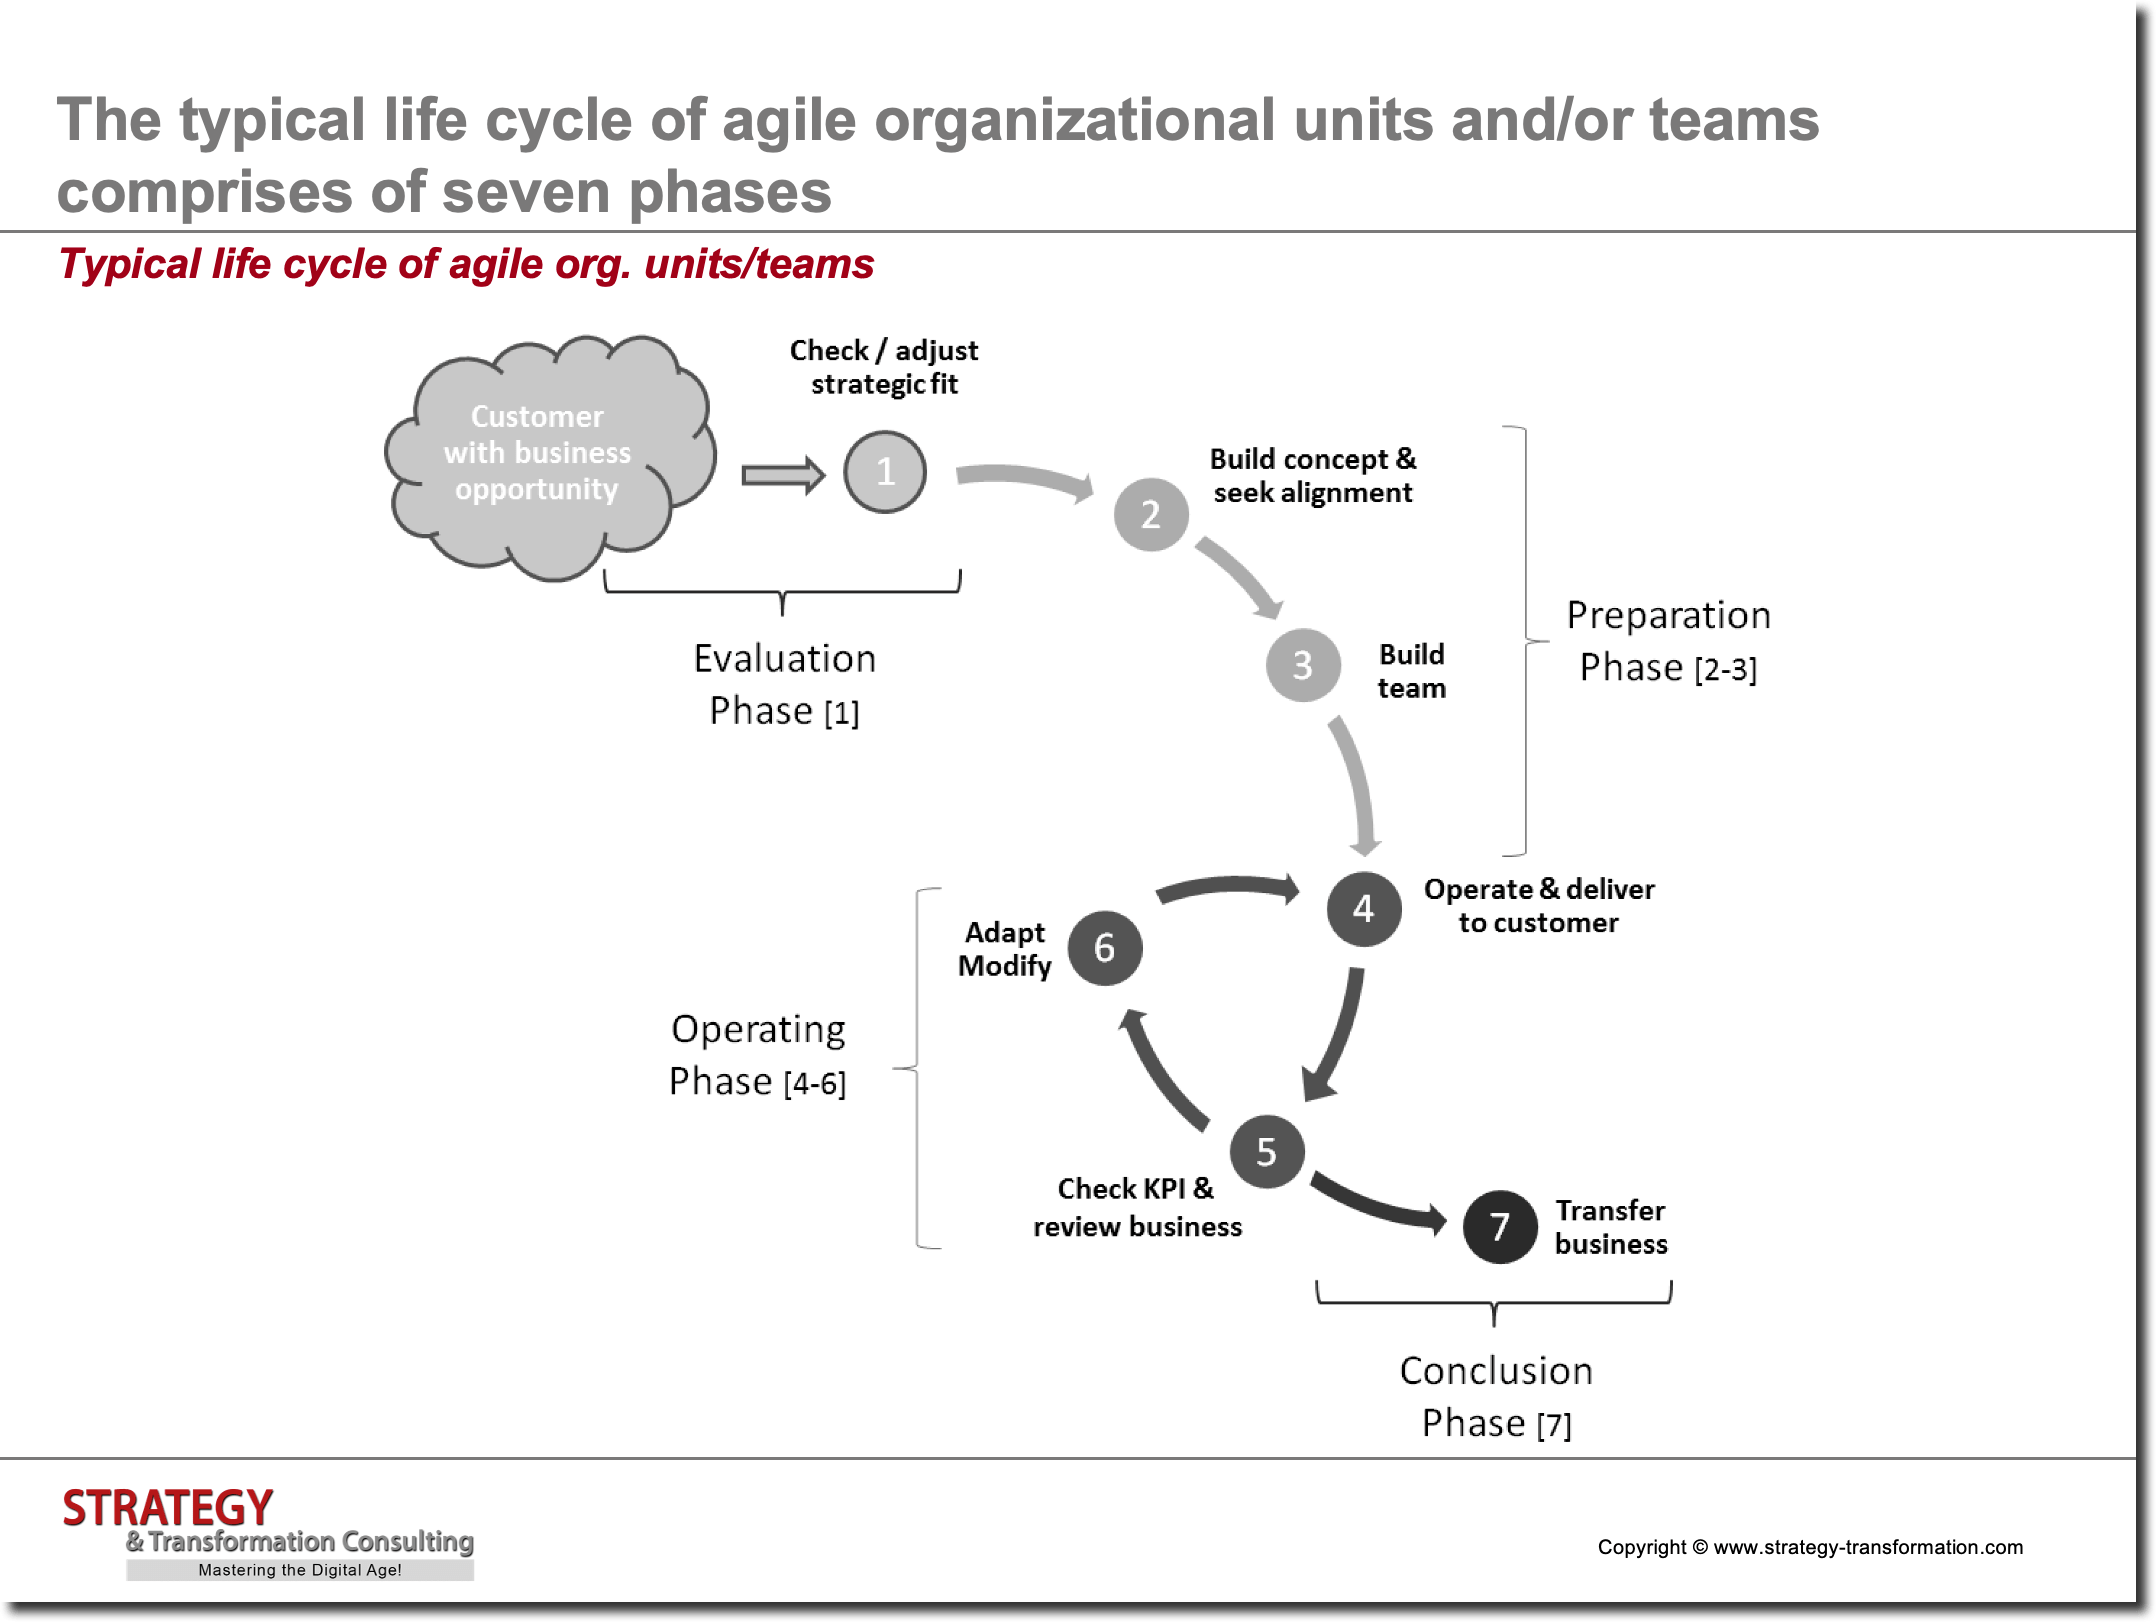 Typical life cycle of agile org units